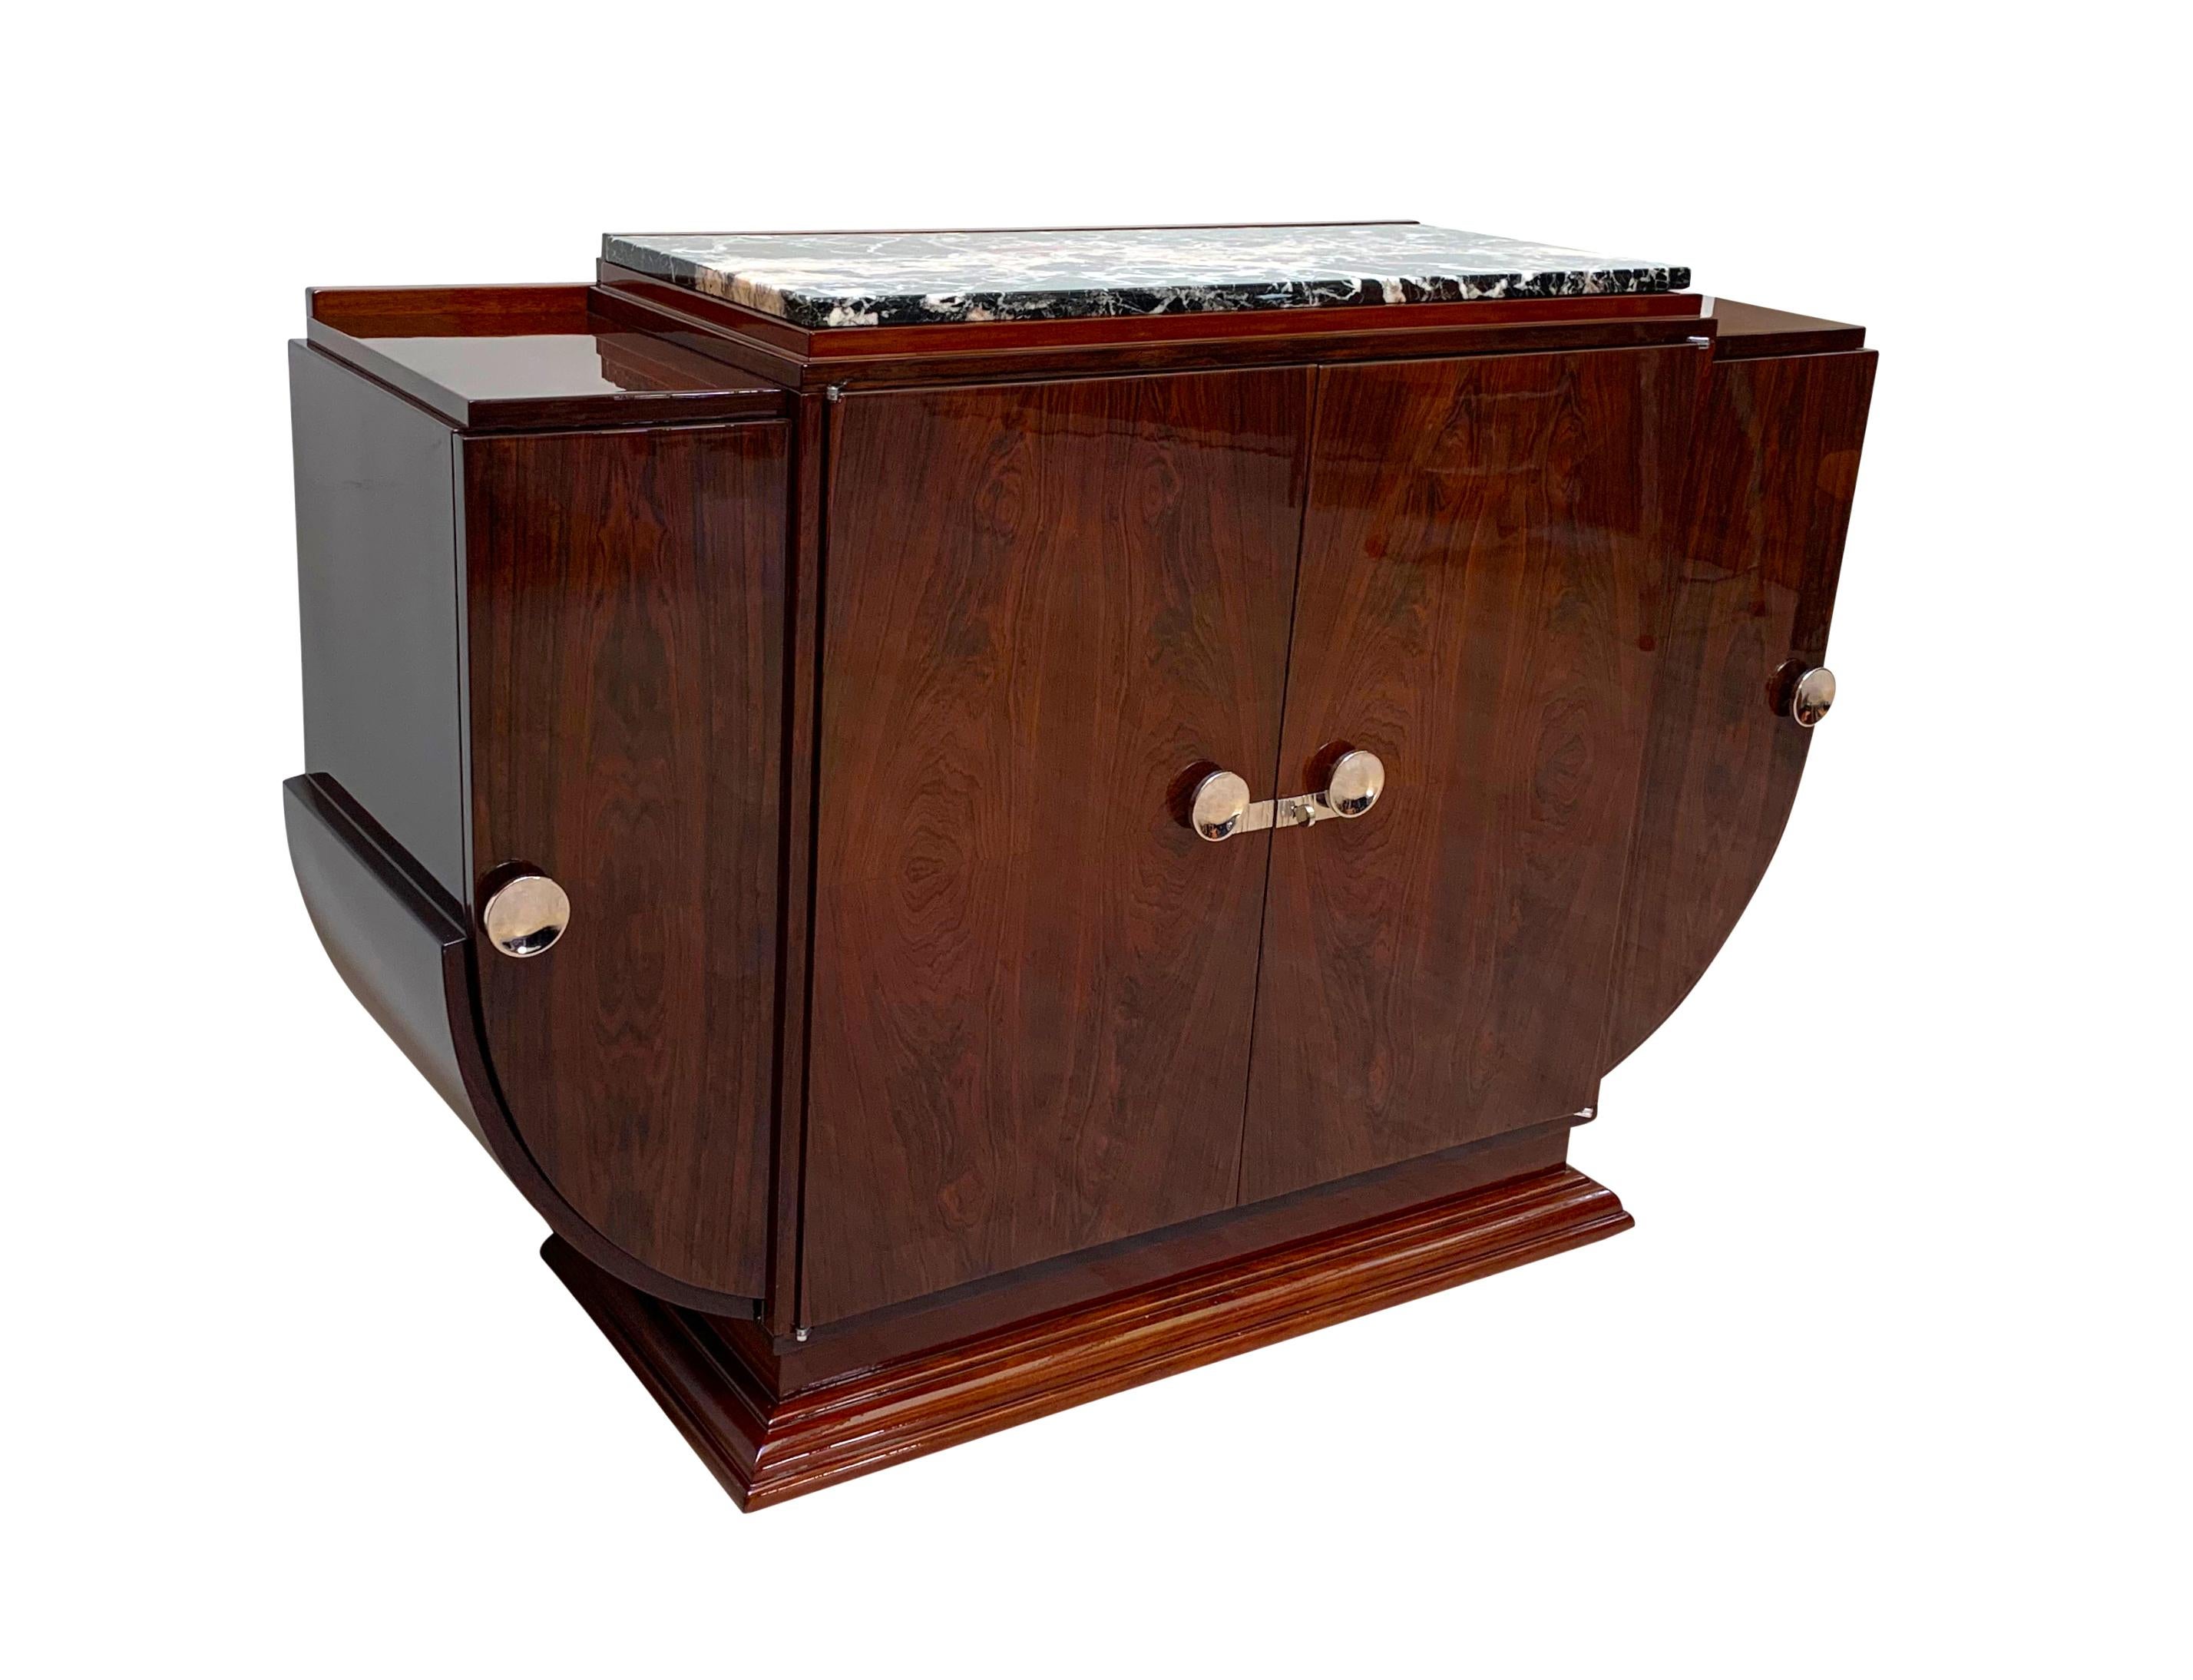 Elegant, high-quality french Art Deco Sideboard, Buffet, or Cabinet from the 1930s. 
This stunning piece has been expertly restored to its former glory, showcasing its unique curved Lyre shape that is sure to make a statement in any space.
Crafted